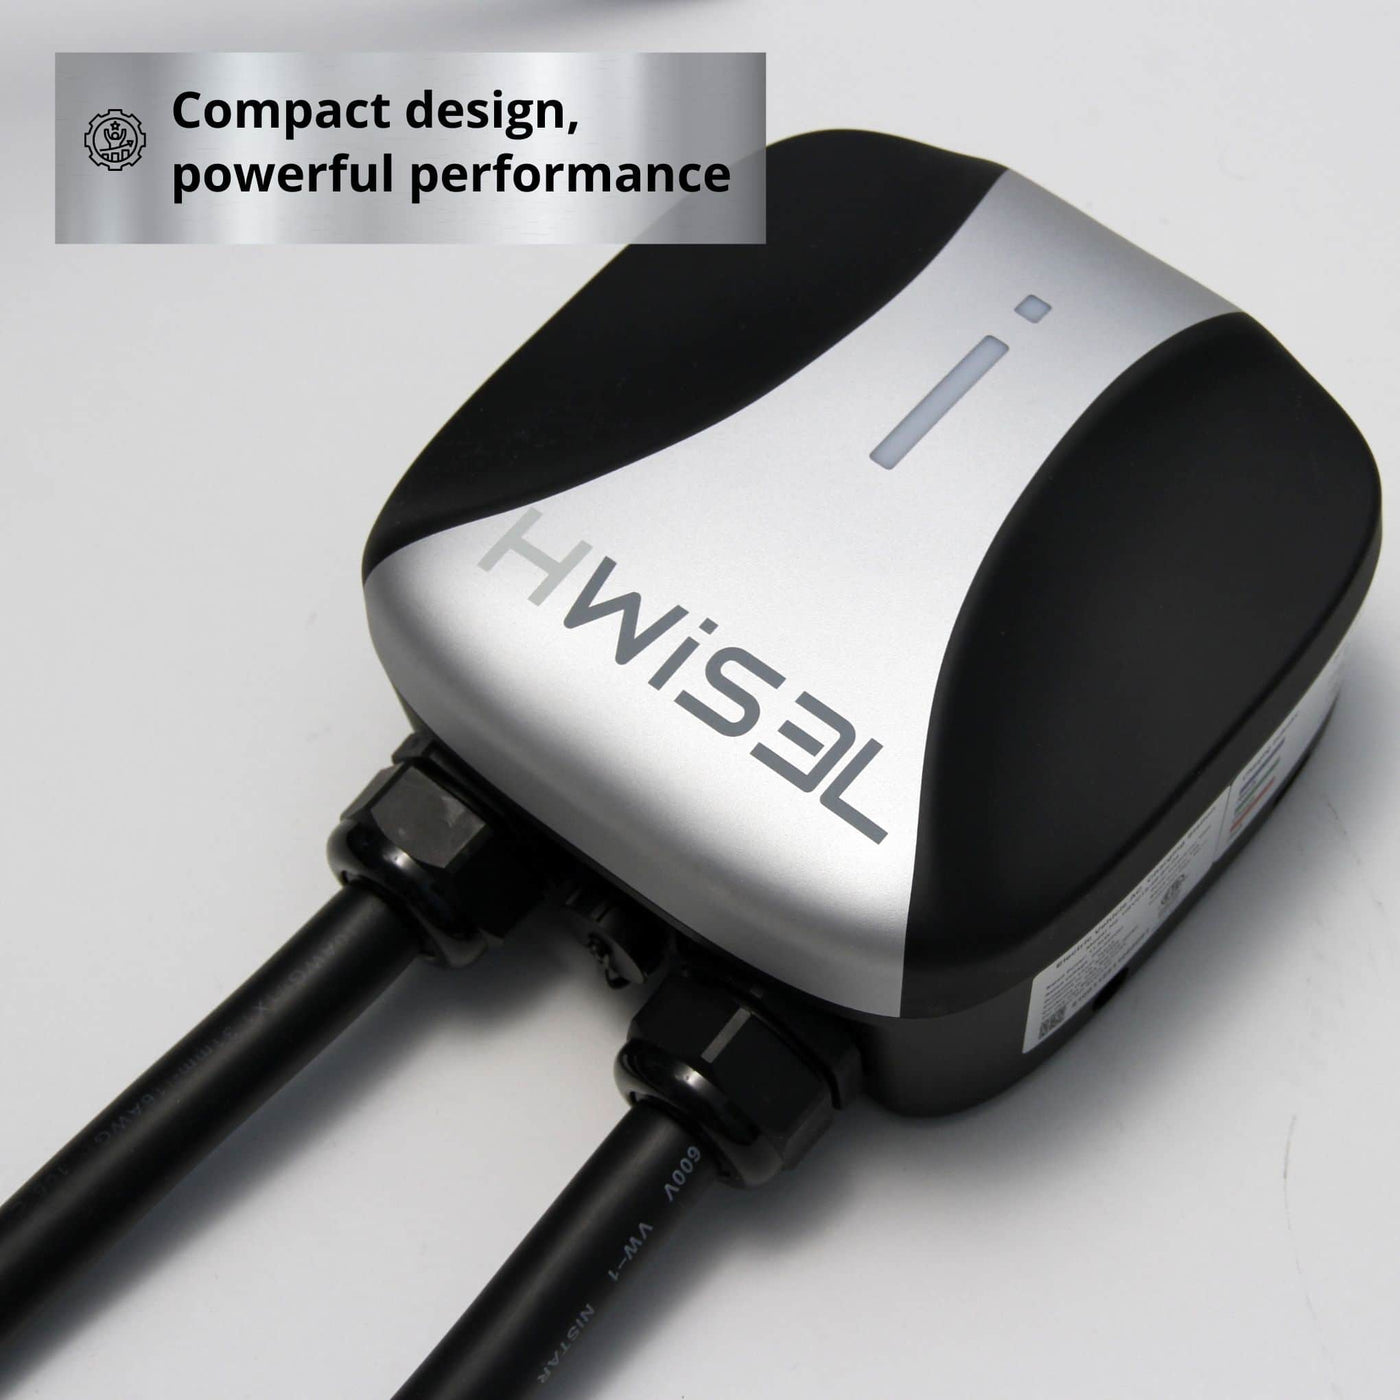 Charger Vip Plan_HWisel HEVC19 Smart Charging Station Image Size 2040x2040 Compact Design Powerful Performance